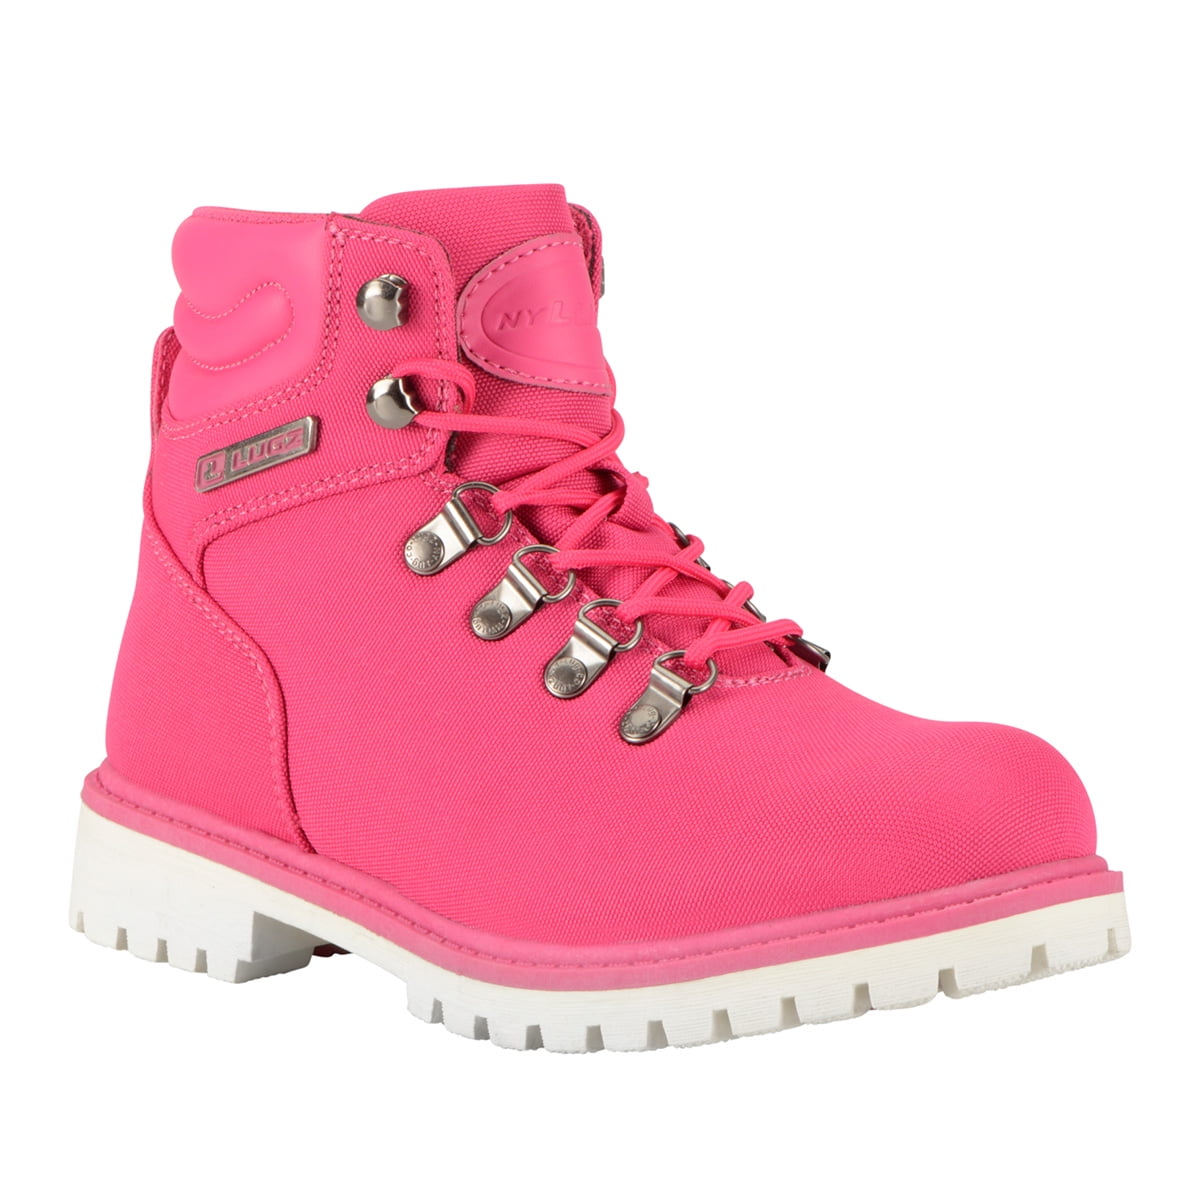 Buy > lugz grotto boots > in stock